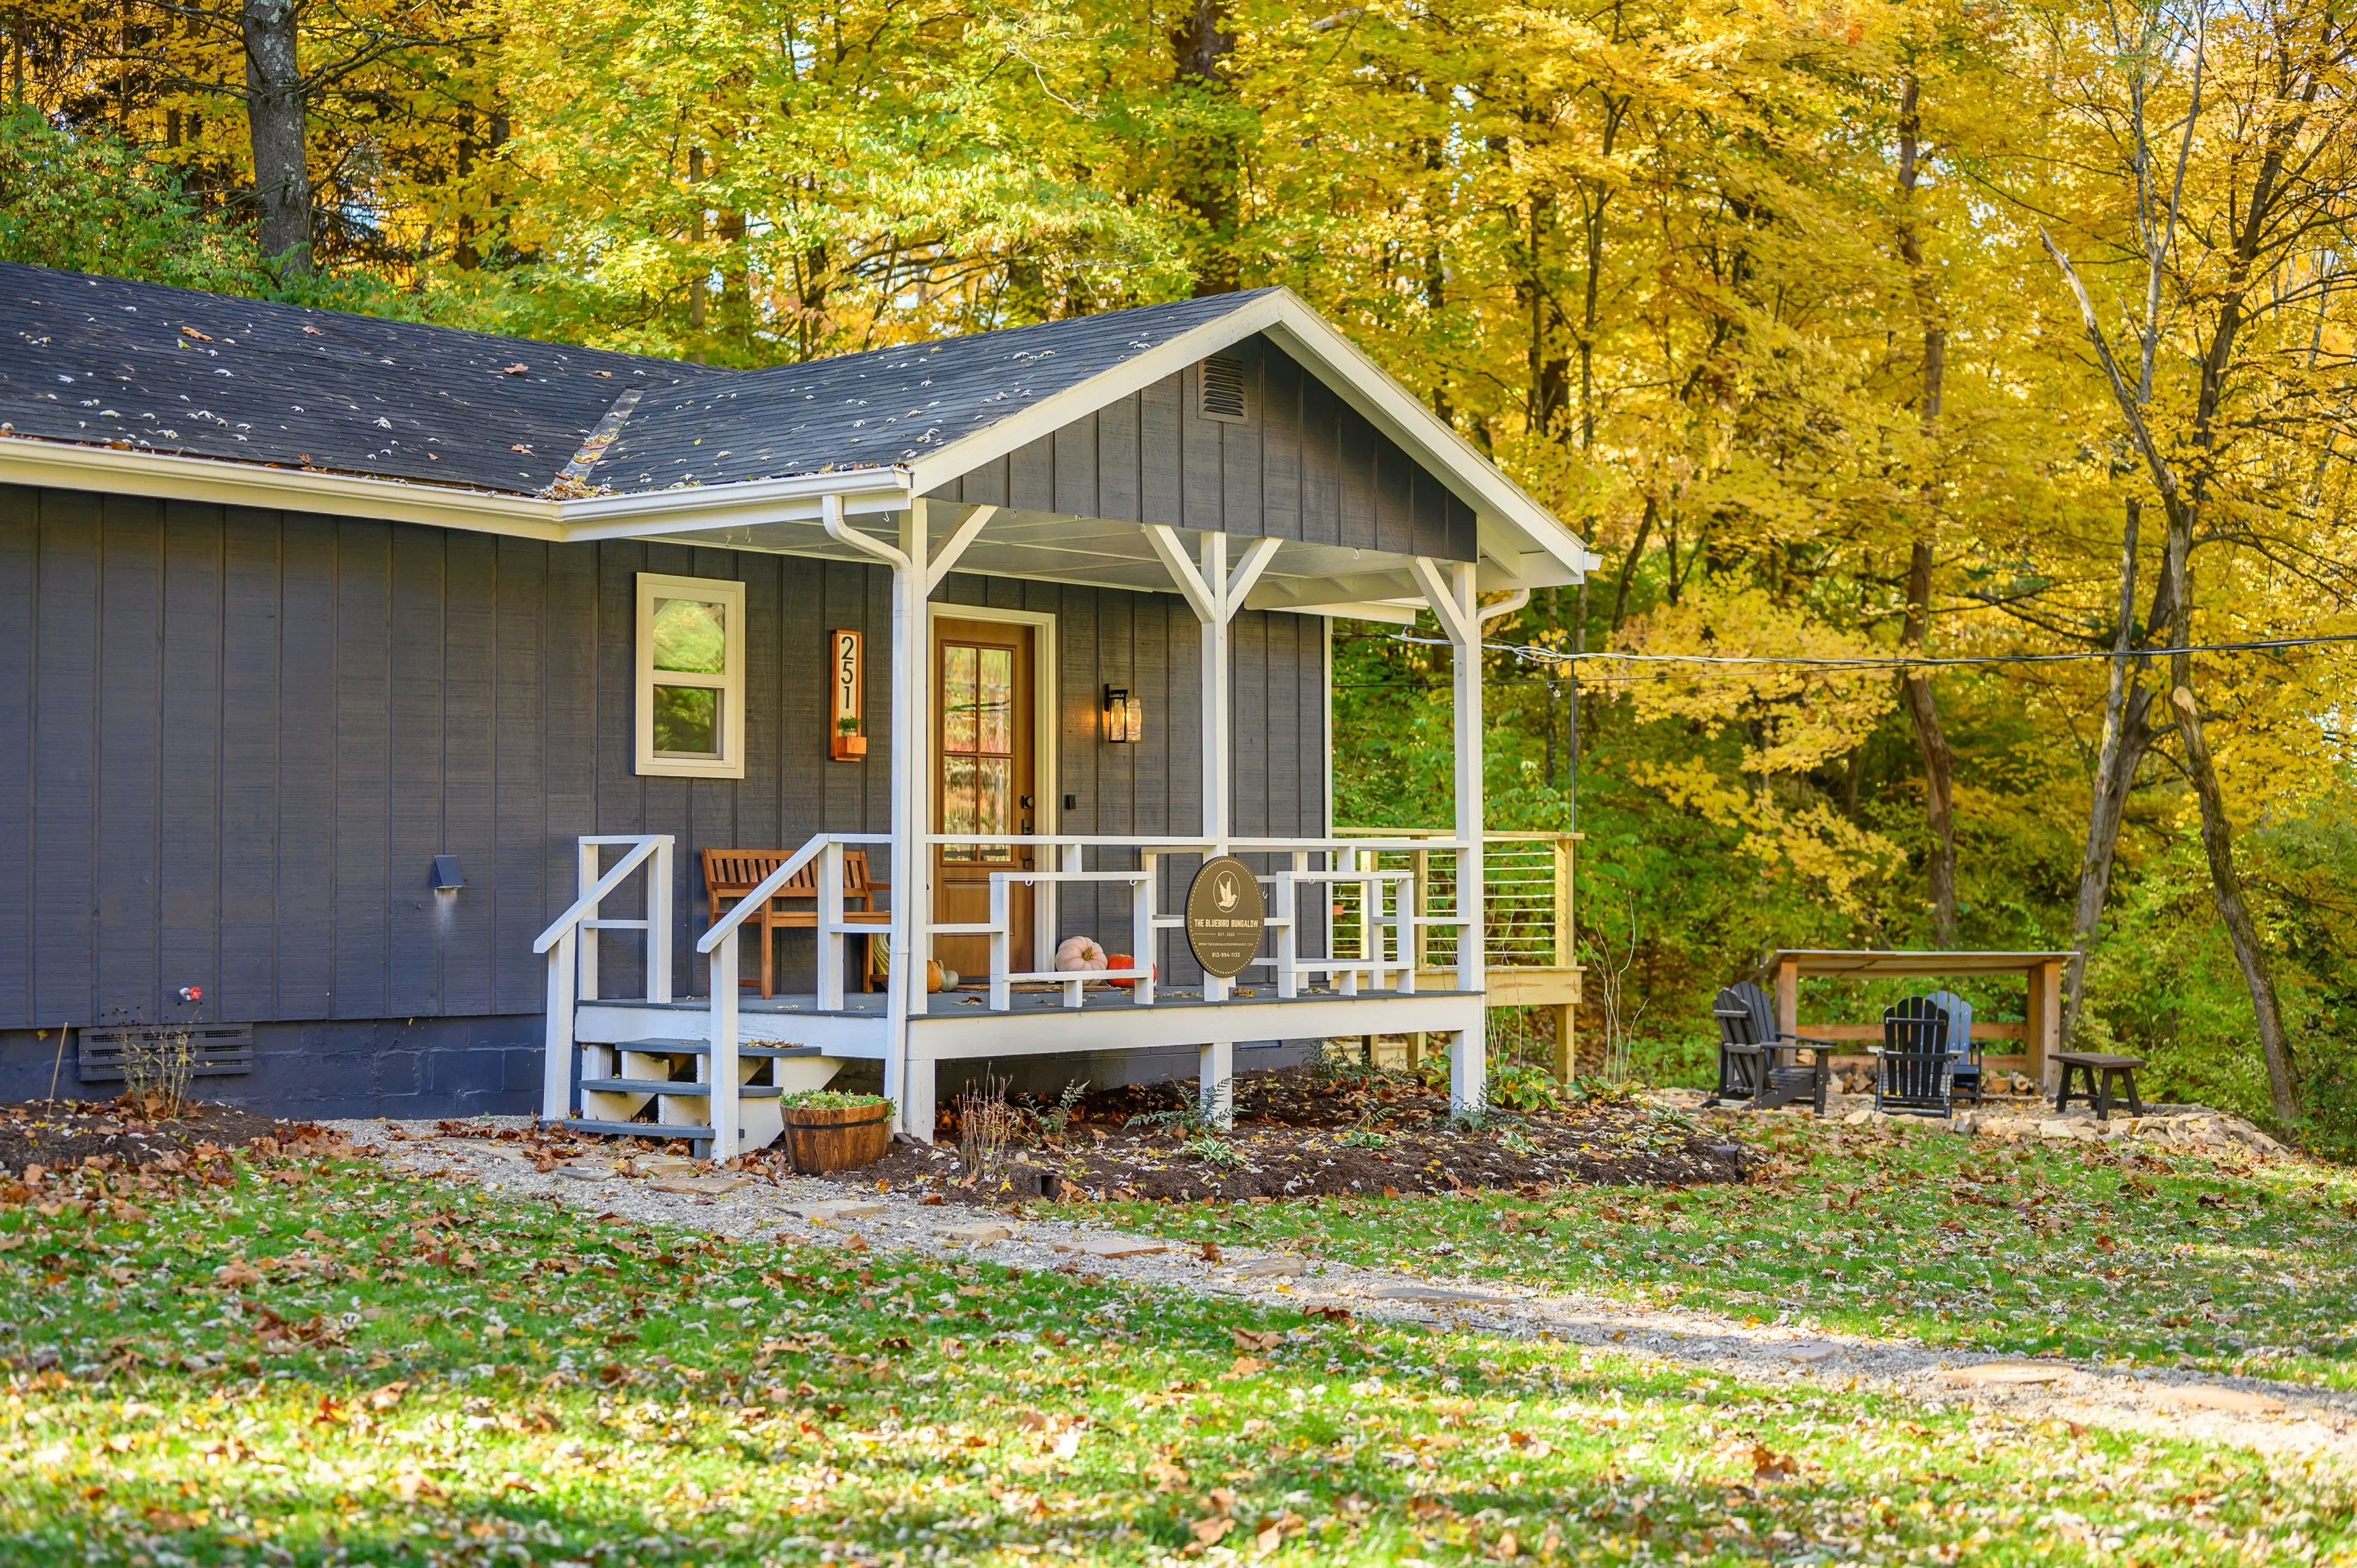 A cozy gray cabin with a front porch surrounded by autumn foliage with a bench and chairs outside under the trees.